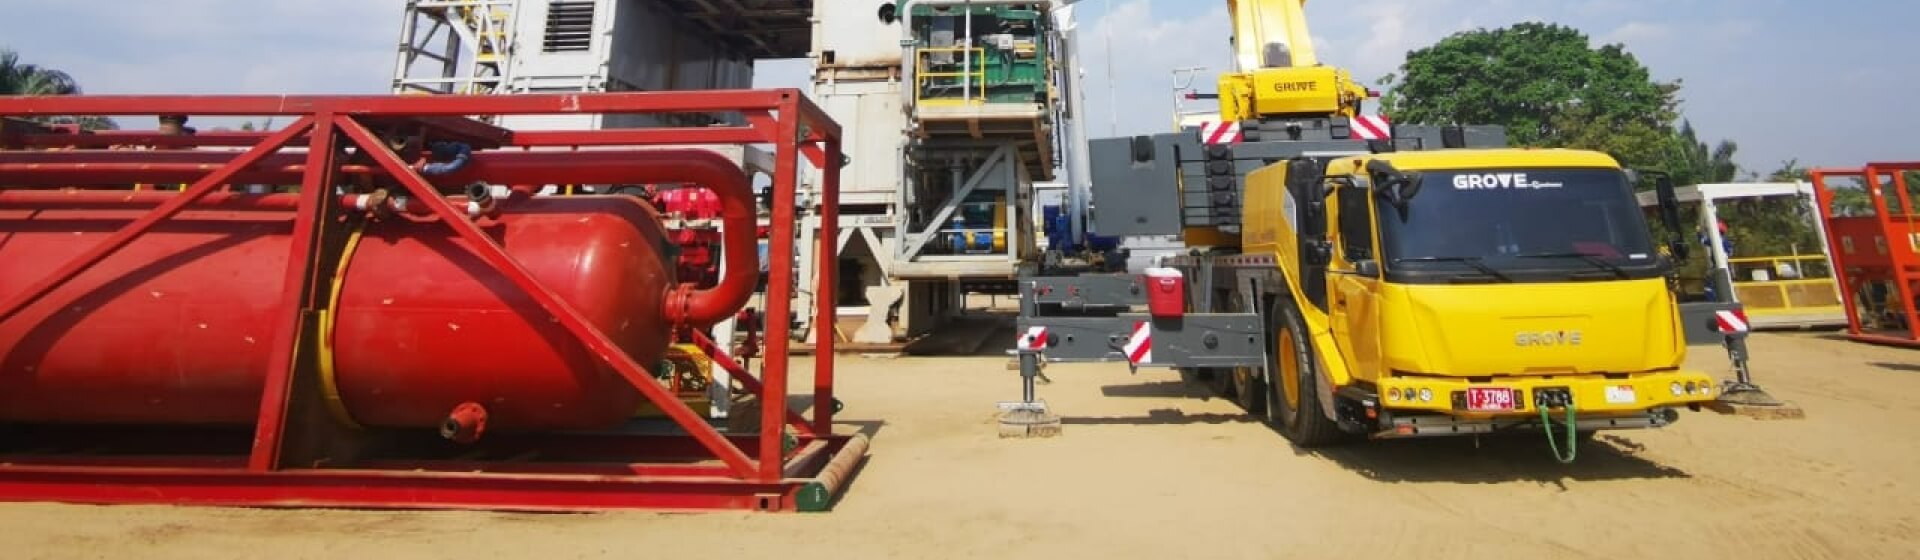 Grove-GMK5150L-proves-ideal-for-Colombia's-oil-and-gas-extraction-industry-01.jpeg